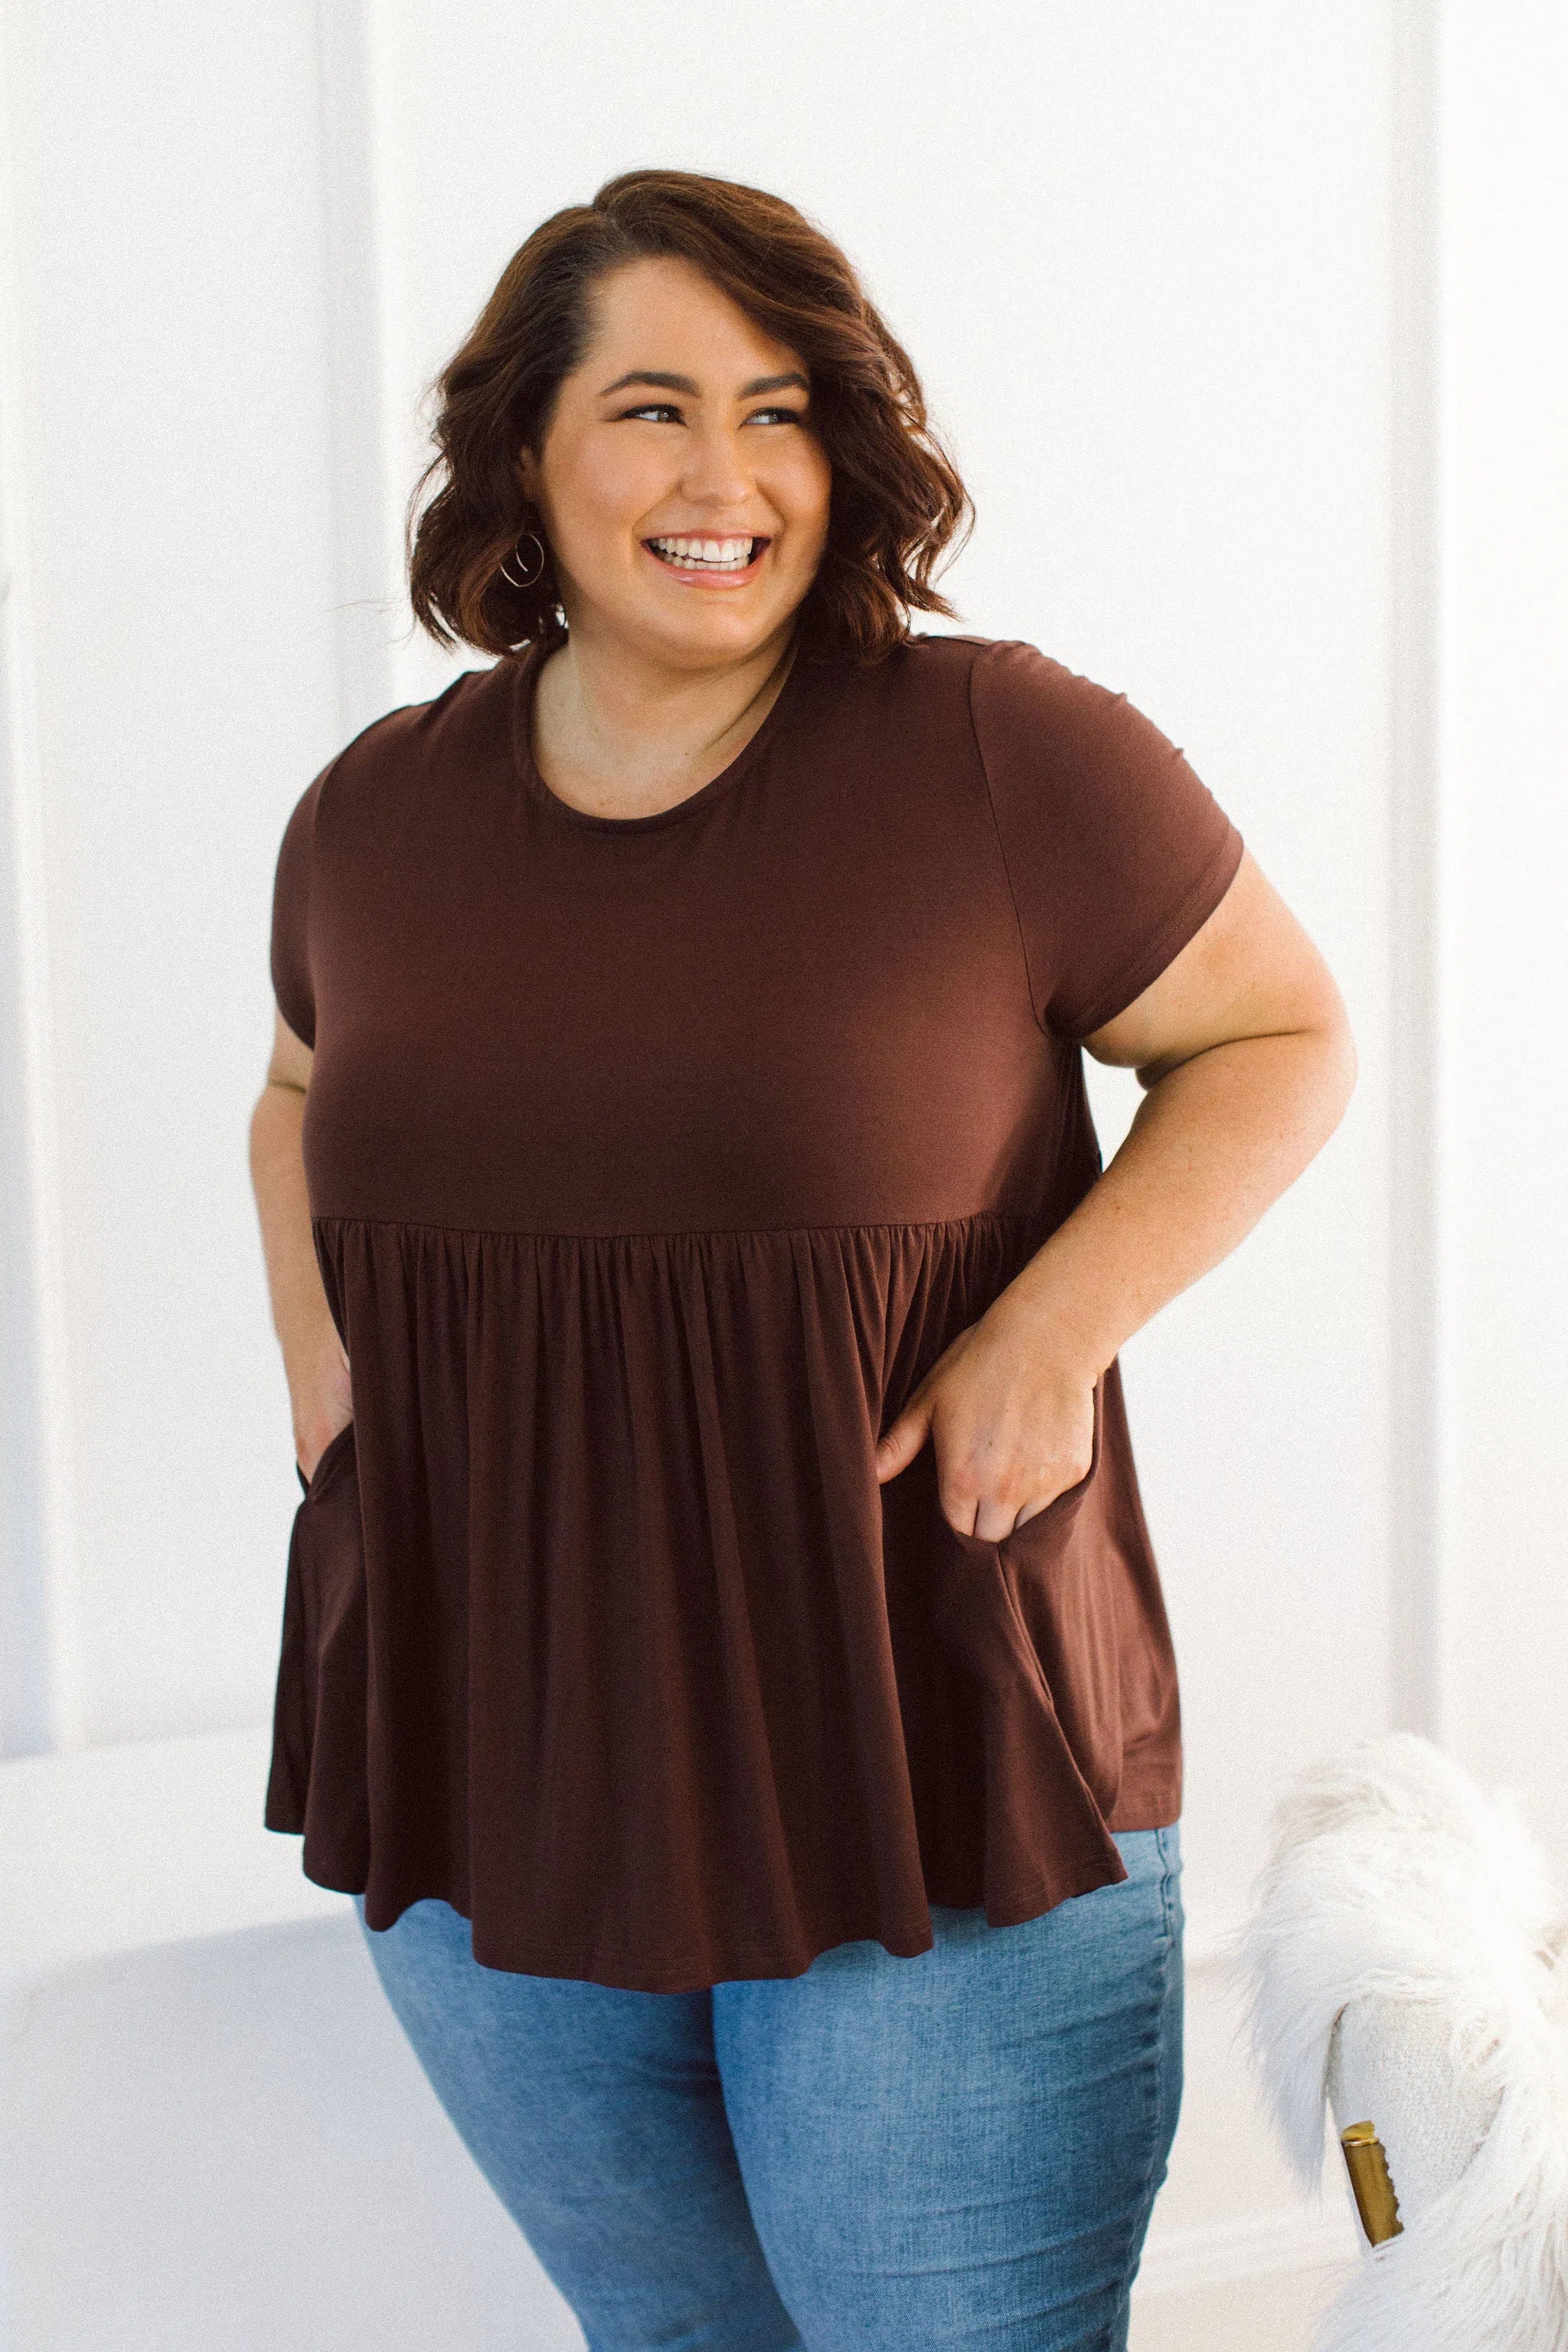 Women's Summer Plus Size T-Shirt - Stay Cool with Lucy Tee in Chocolate